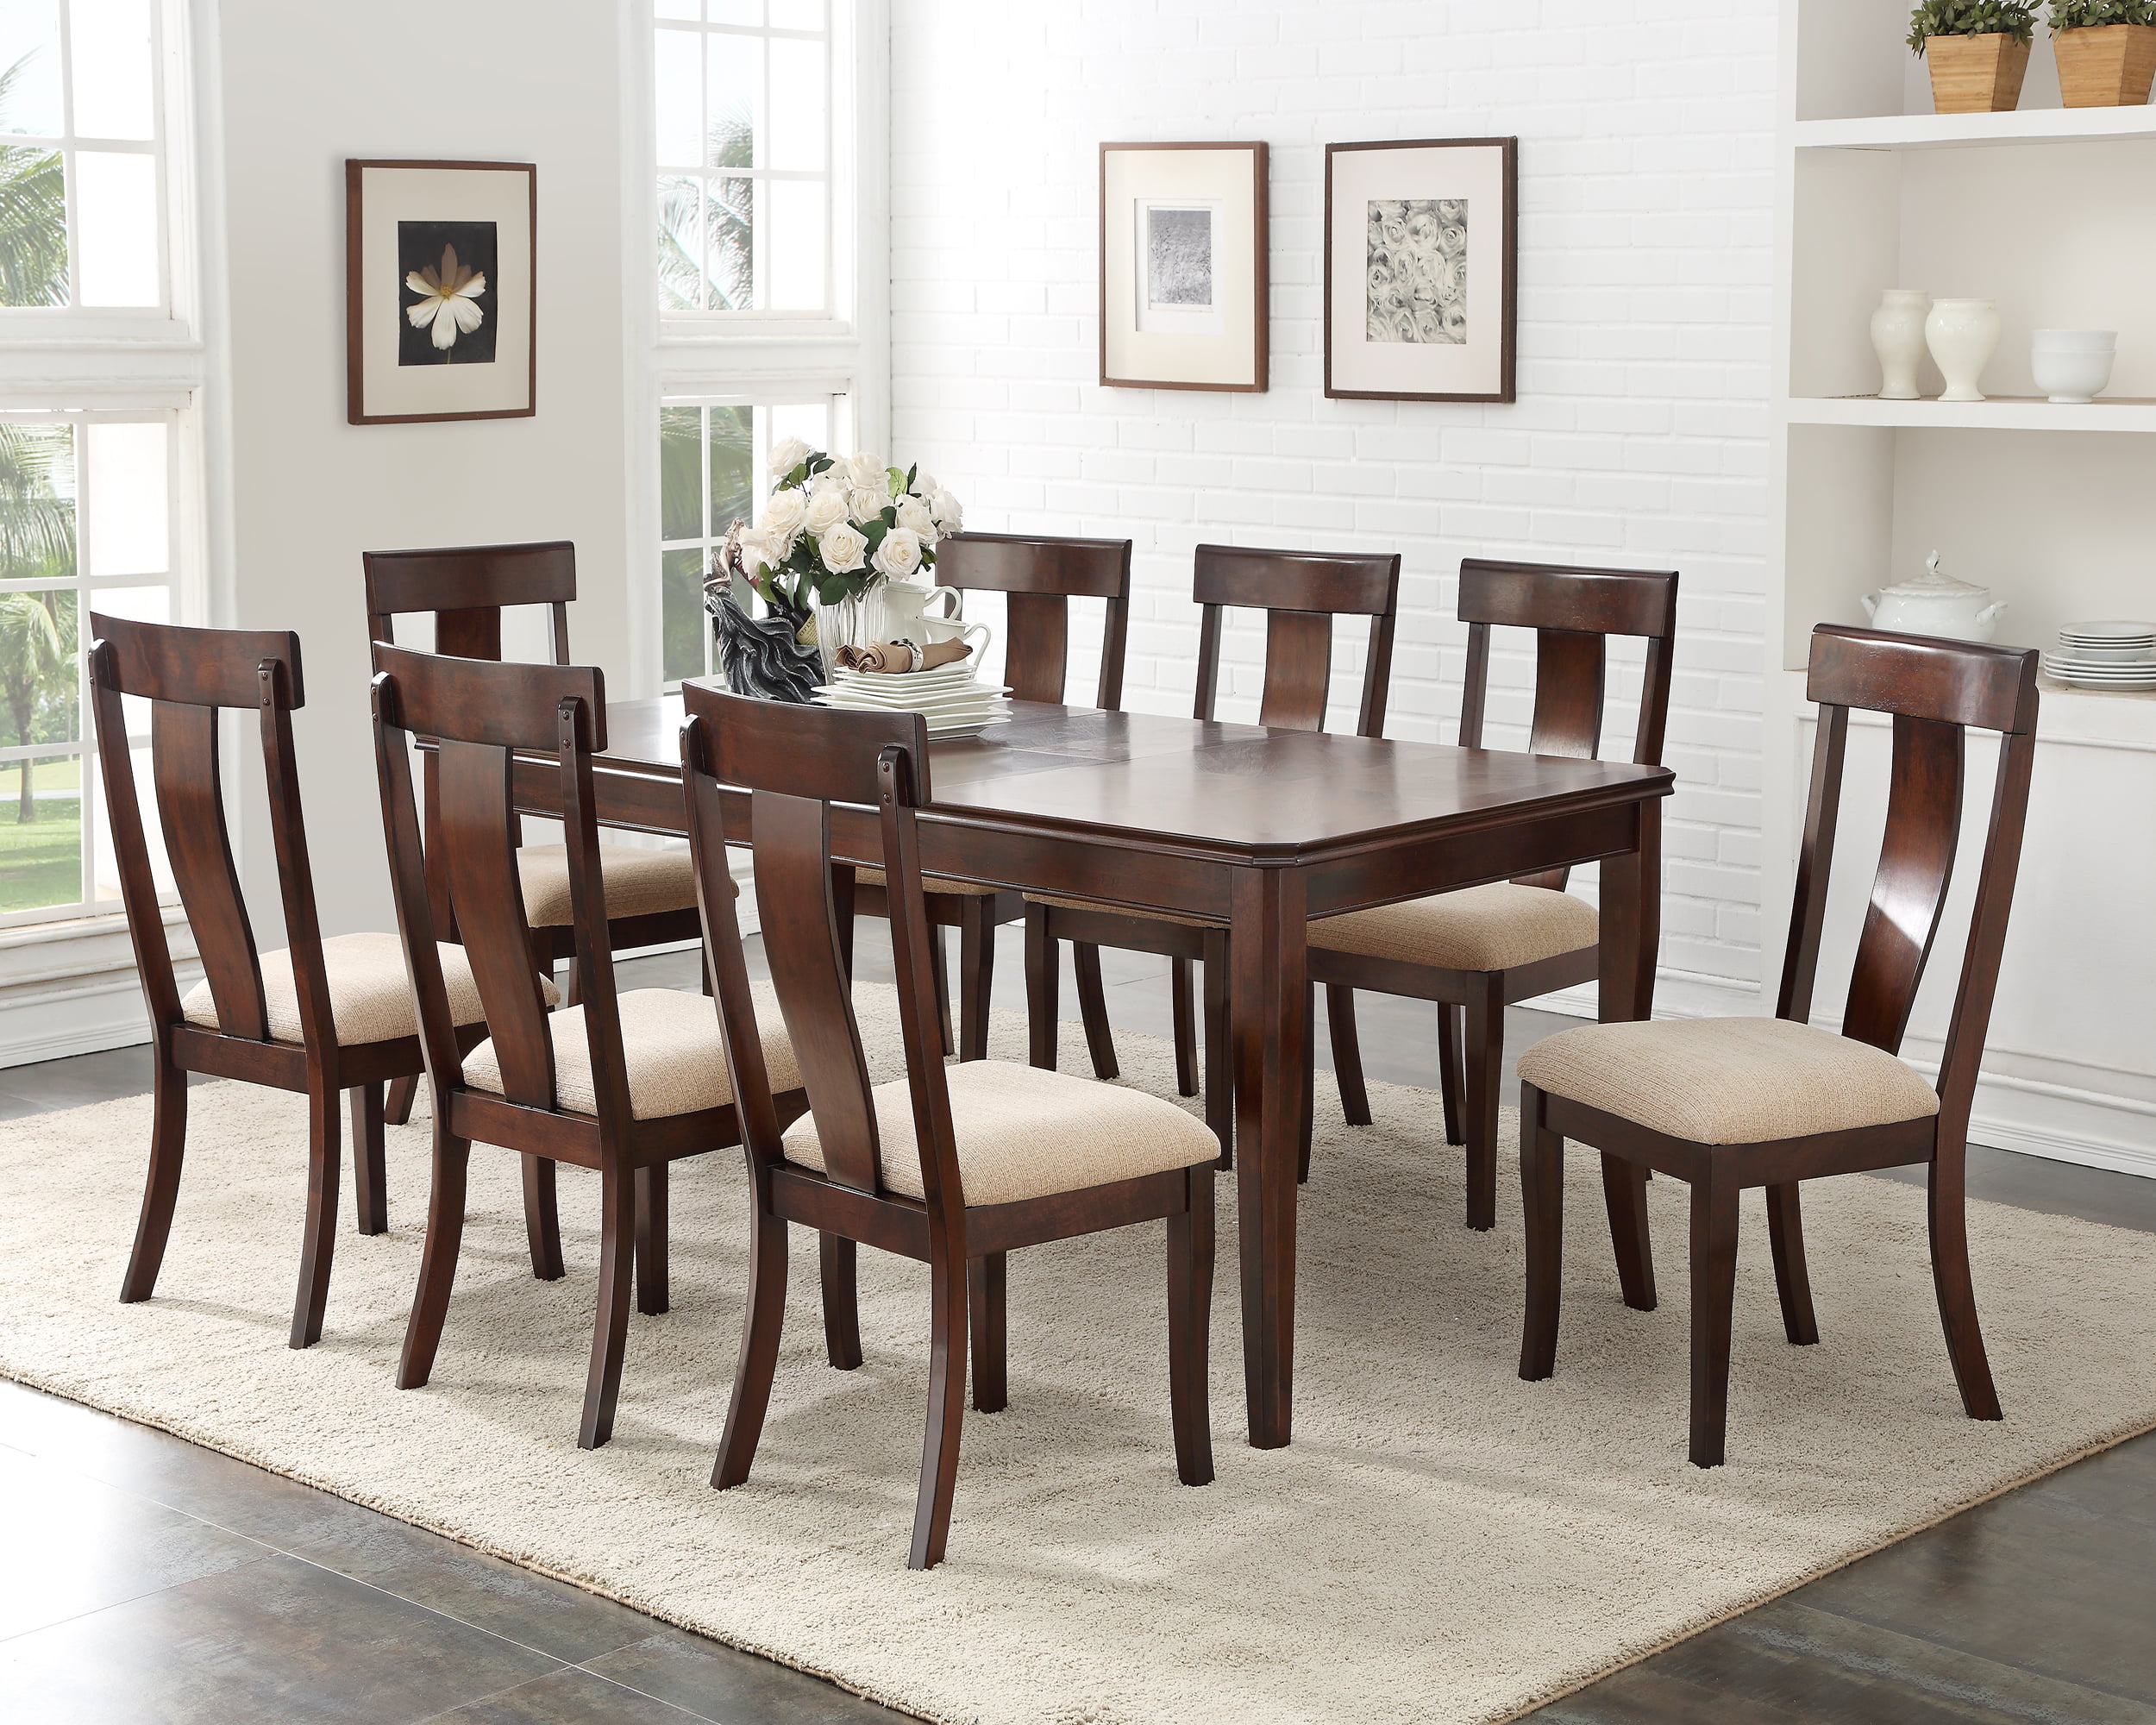 D1004 1 Cherry Wood Contemporary, Extendable Dining Room Table Seats 123